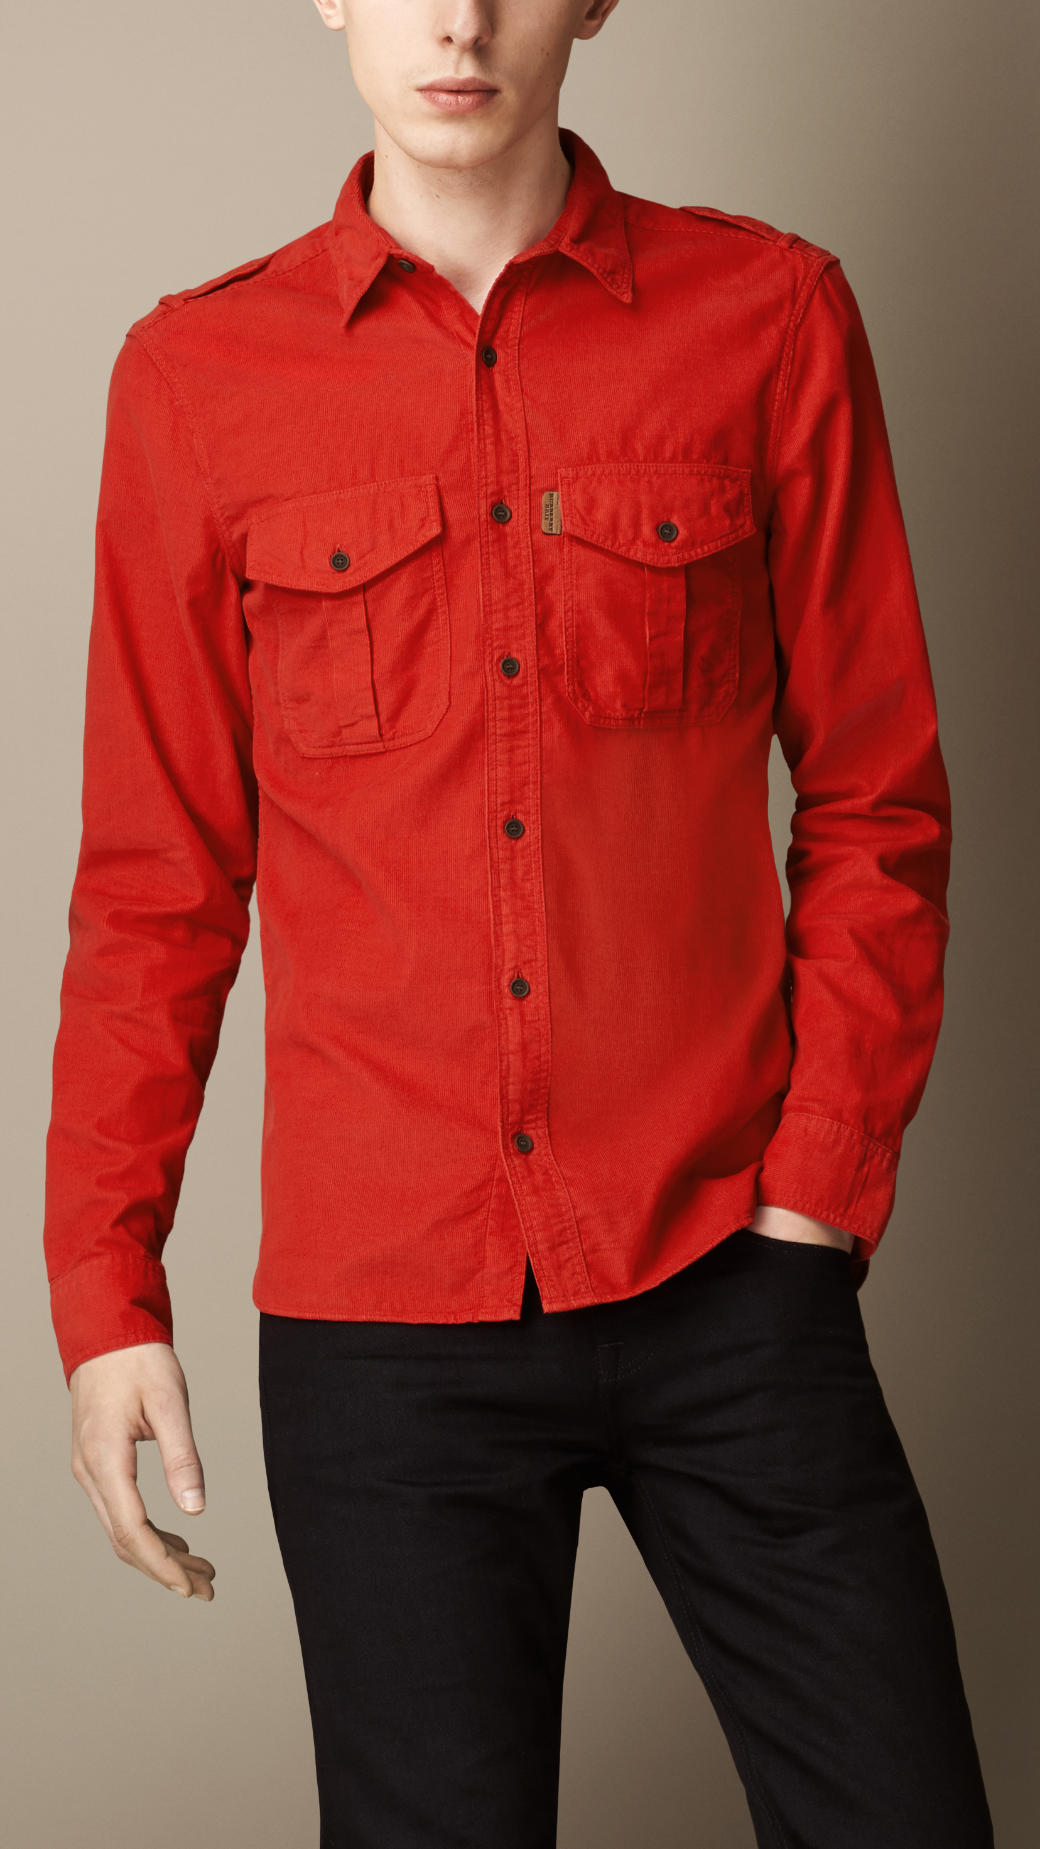 Burberry Corduroy Military Shirt in Bright Military Red (Red) for Men ...